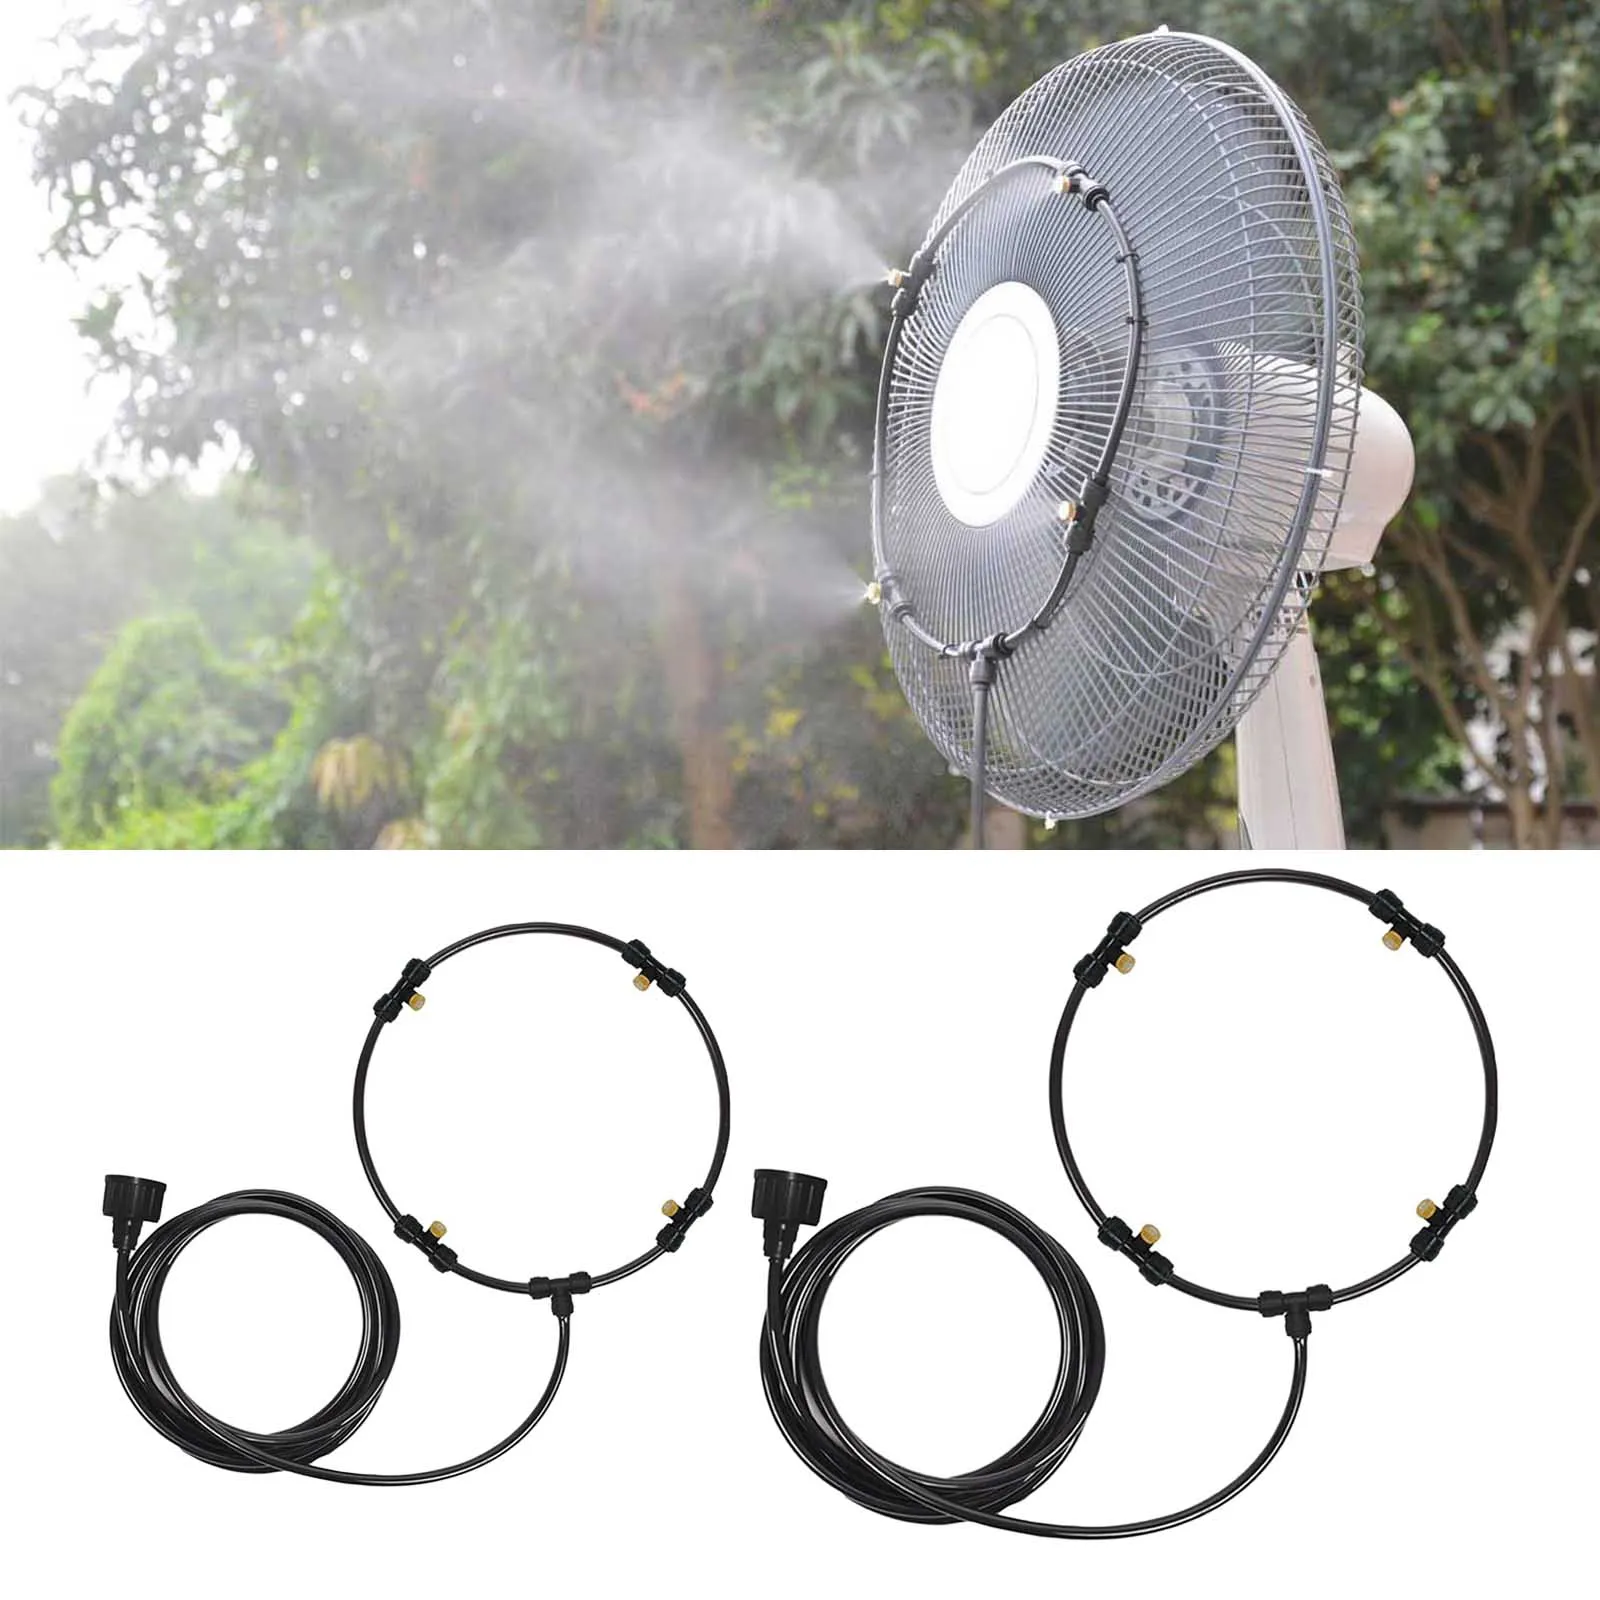 Garden Spray Portable Mist fan Ring 4 spray nozzles water mist fog sprayer cooling system 3m Hose with Brass Nozzles